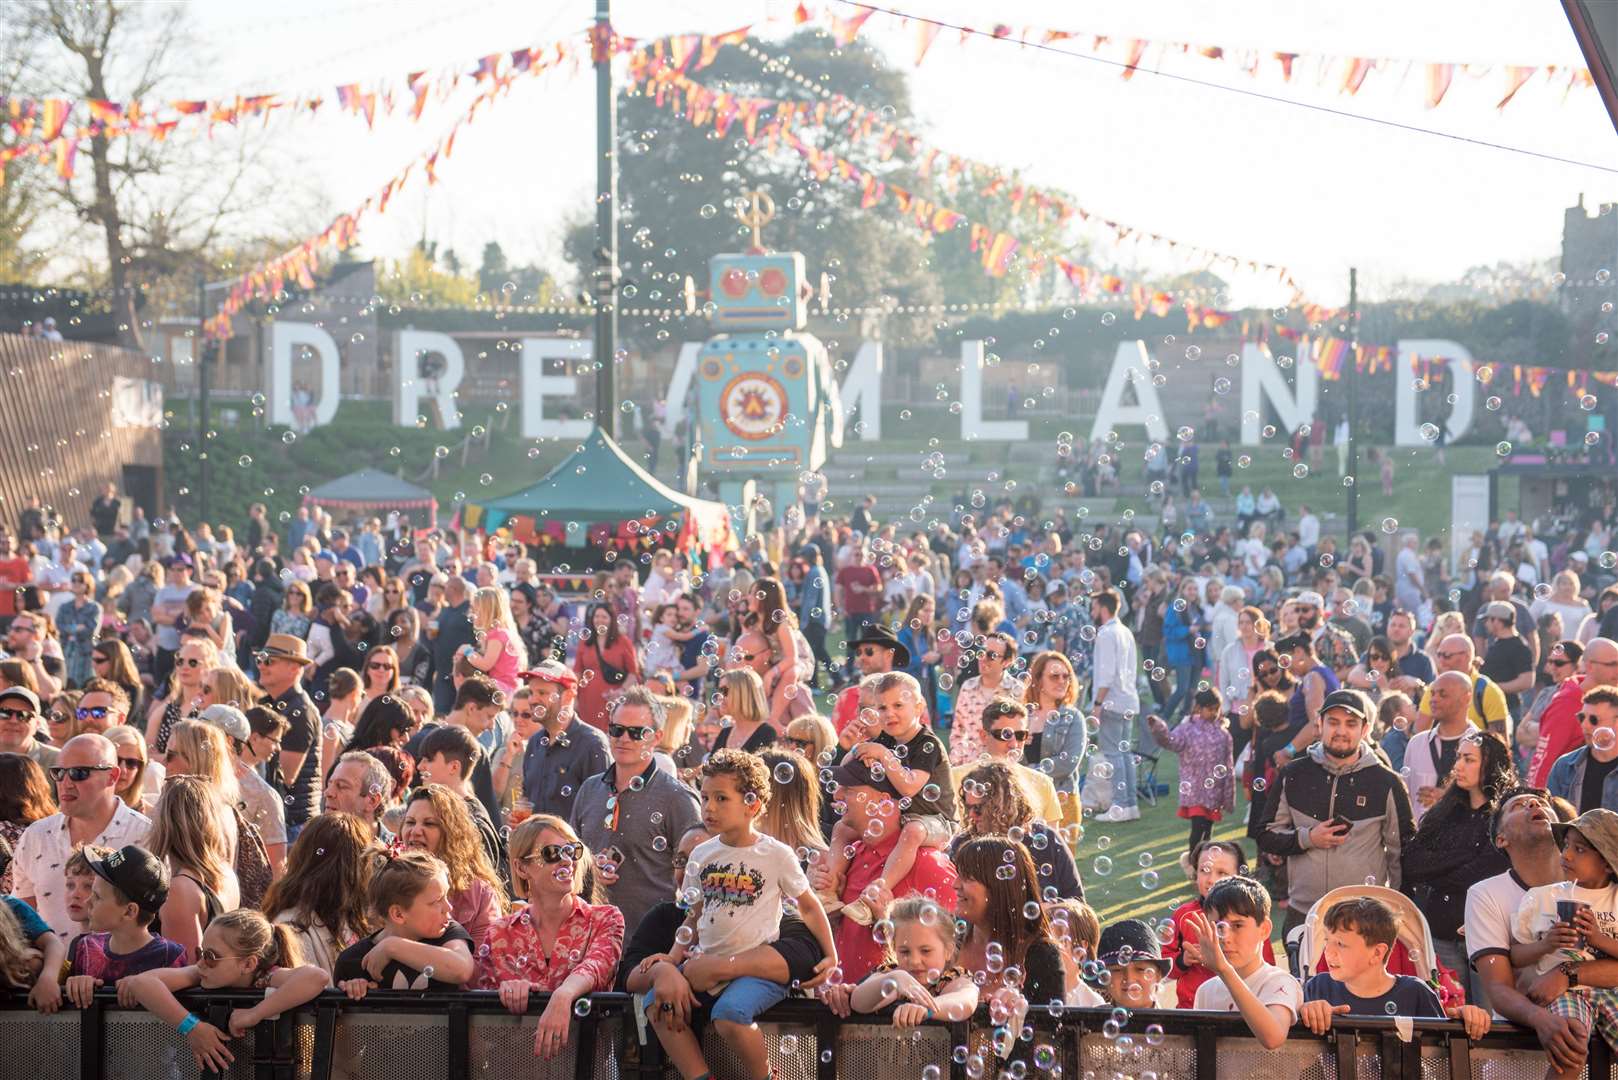 Dreamland is planning a range of projects to celebrate its 100th birthday in 2020